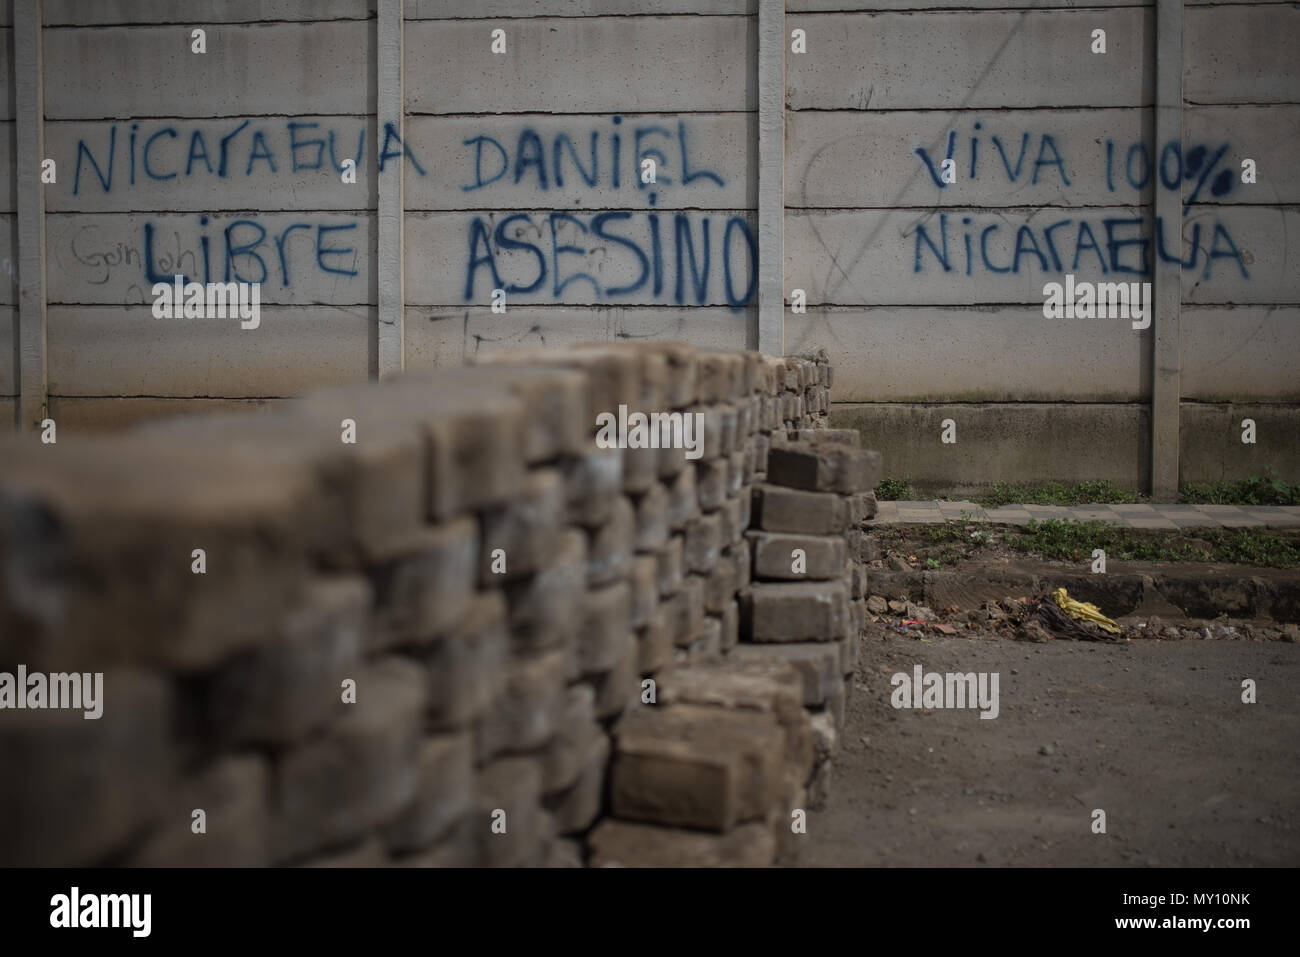 04 June 2018, Nicaragua, Masaya: A wall reads 'Nicaragua Libre. Daniel, Asesino. Viva 100% Nicaragua' (lit. free Nicaragua, Daniel, murderer, live 100% Nicaragua) next to a barricade. For the most part, Masaya is controlled by government opponents that set up barricades and deny access to the police. Hooded gunmen stormed the city on Sunday night (local time) according to human rights activists. Photo: Carlos Herrera/dpa Stock Photo